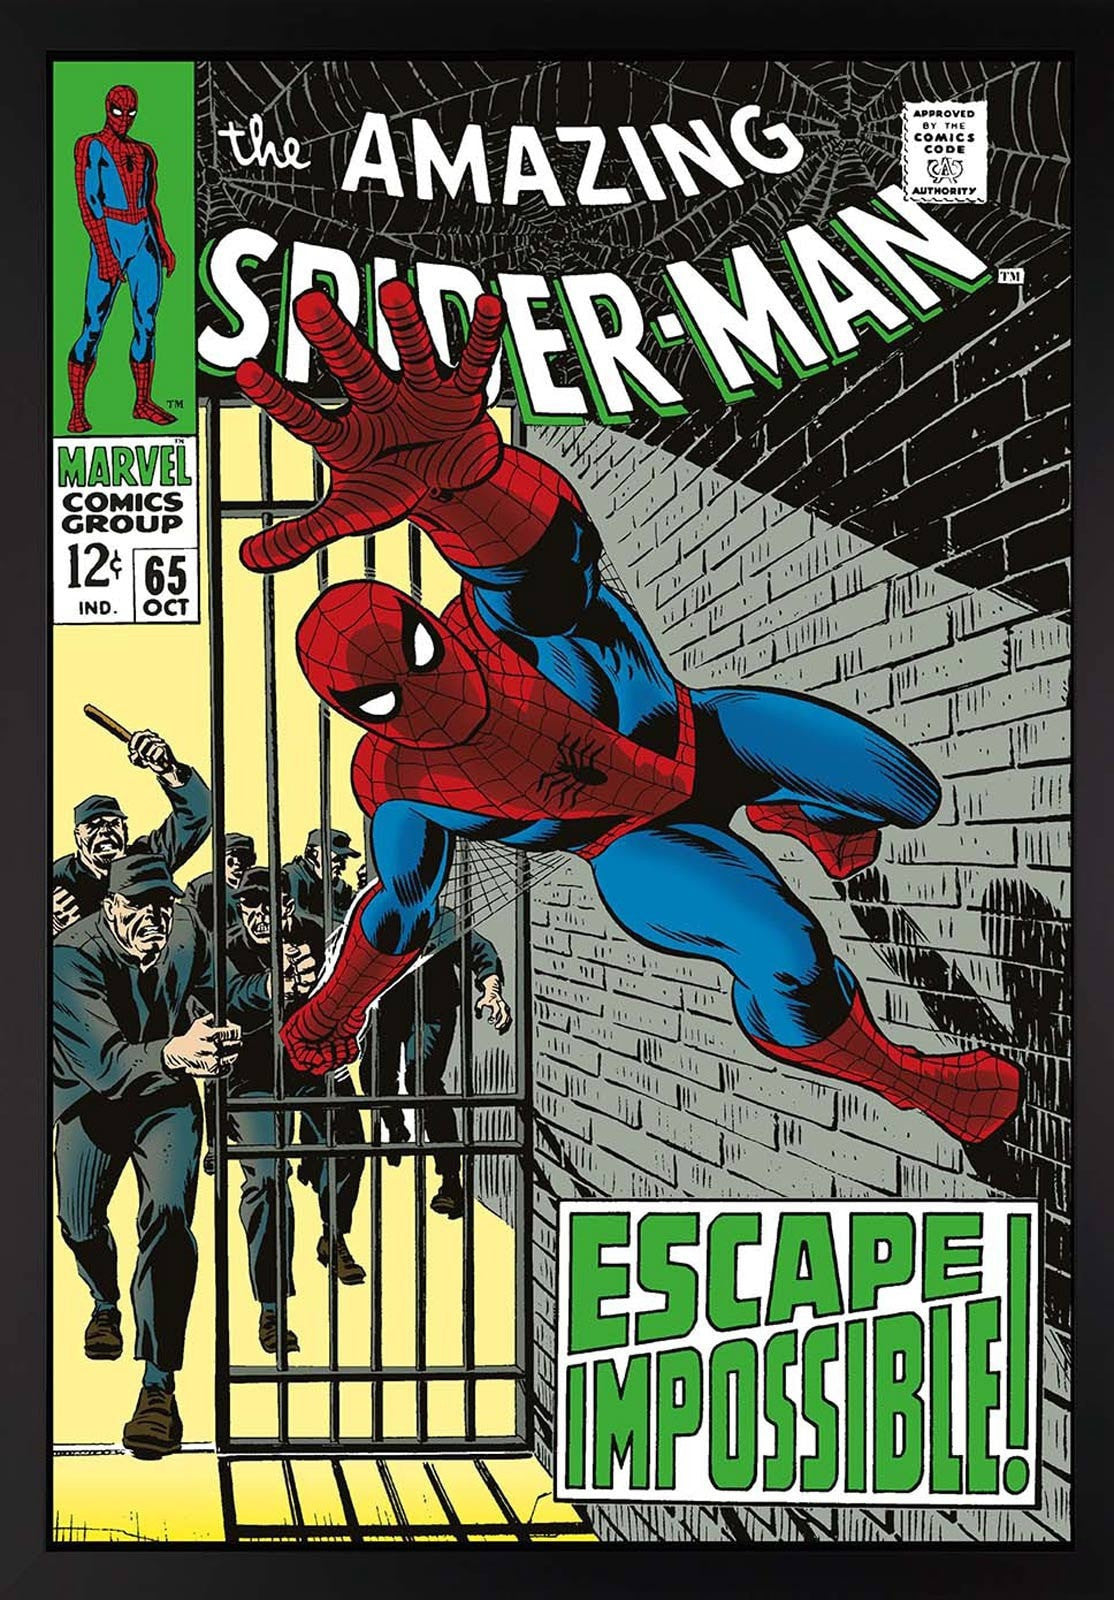 The Amazing Spider-Man #65 - Escape Impossible! Stan Lee